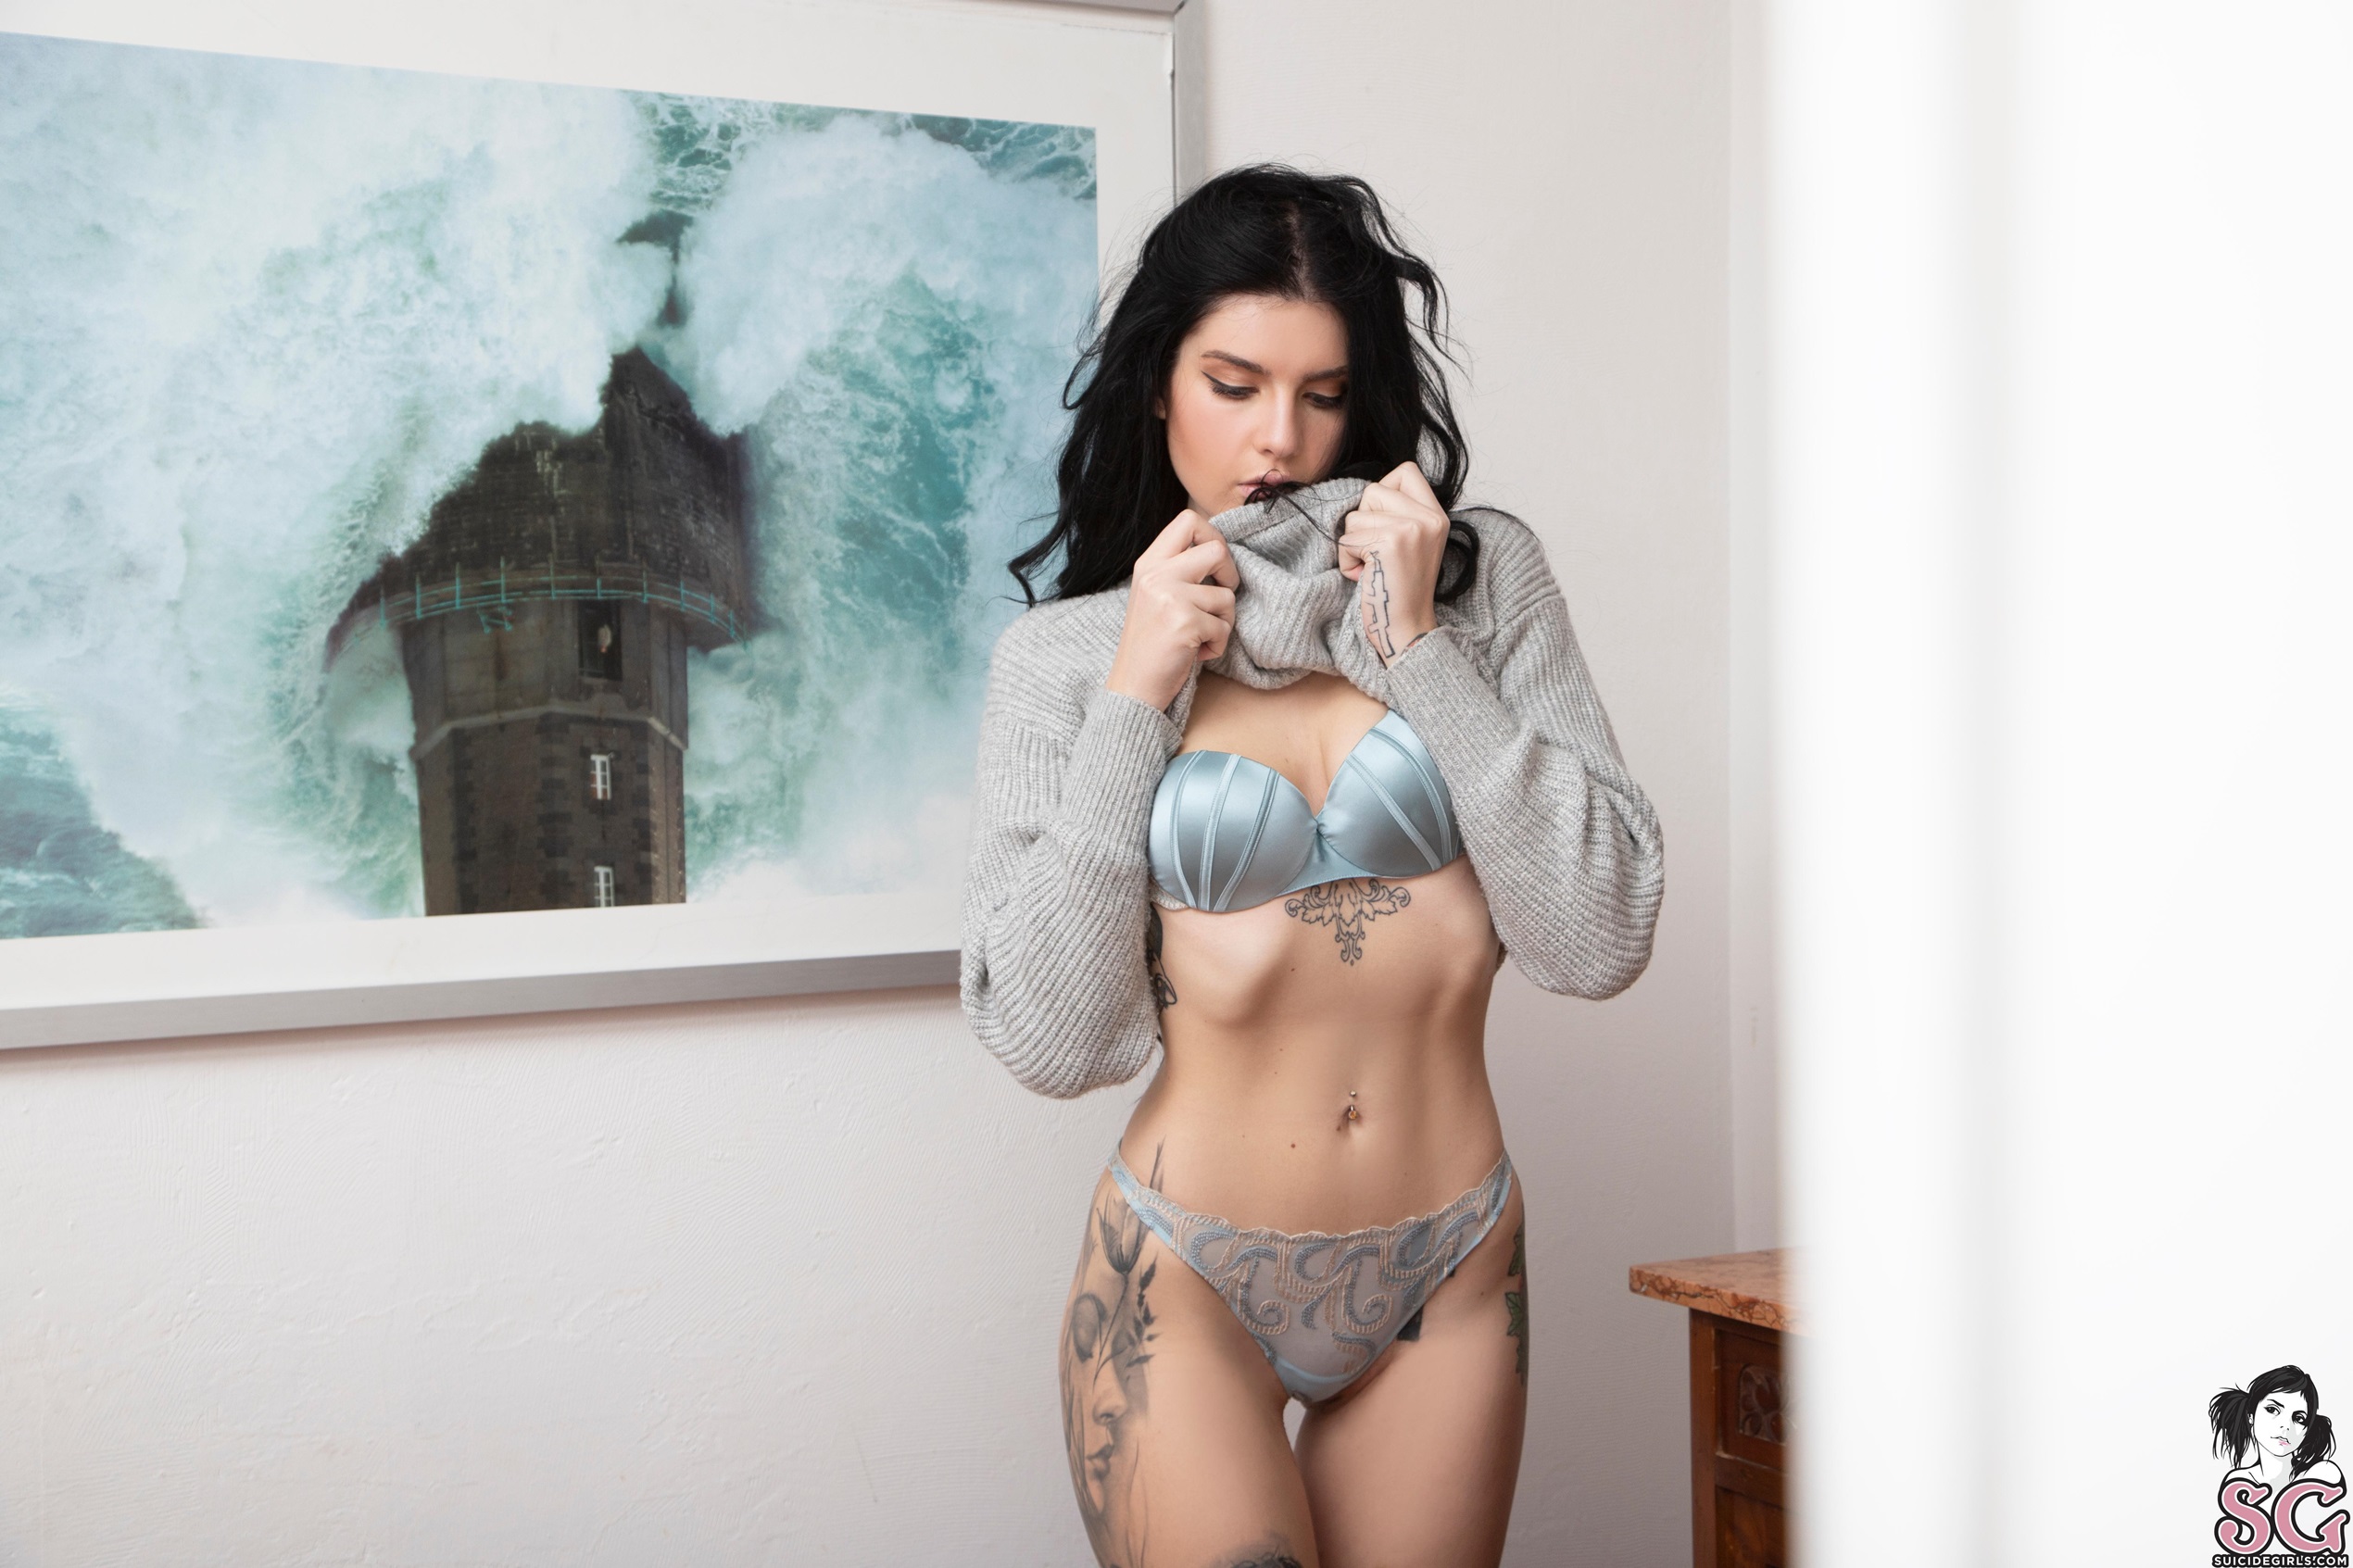 People 2540x1693 Bobonco Suicide women Suicide Girls inked girls model the gap lingerie belly tattoo